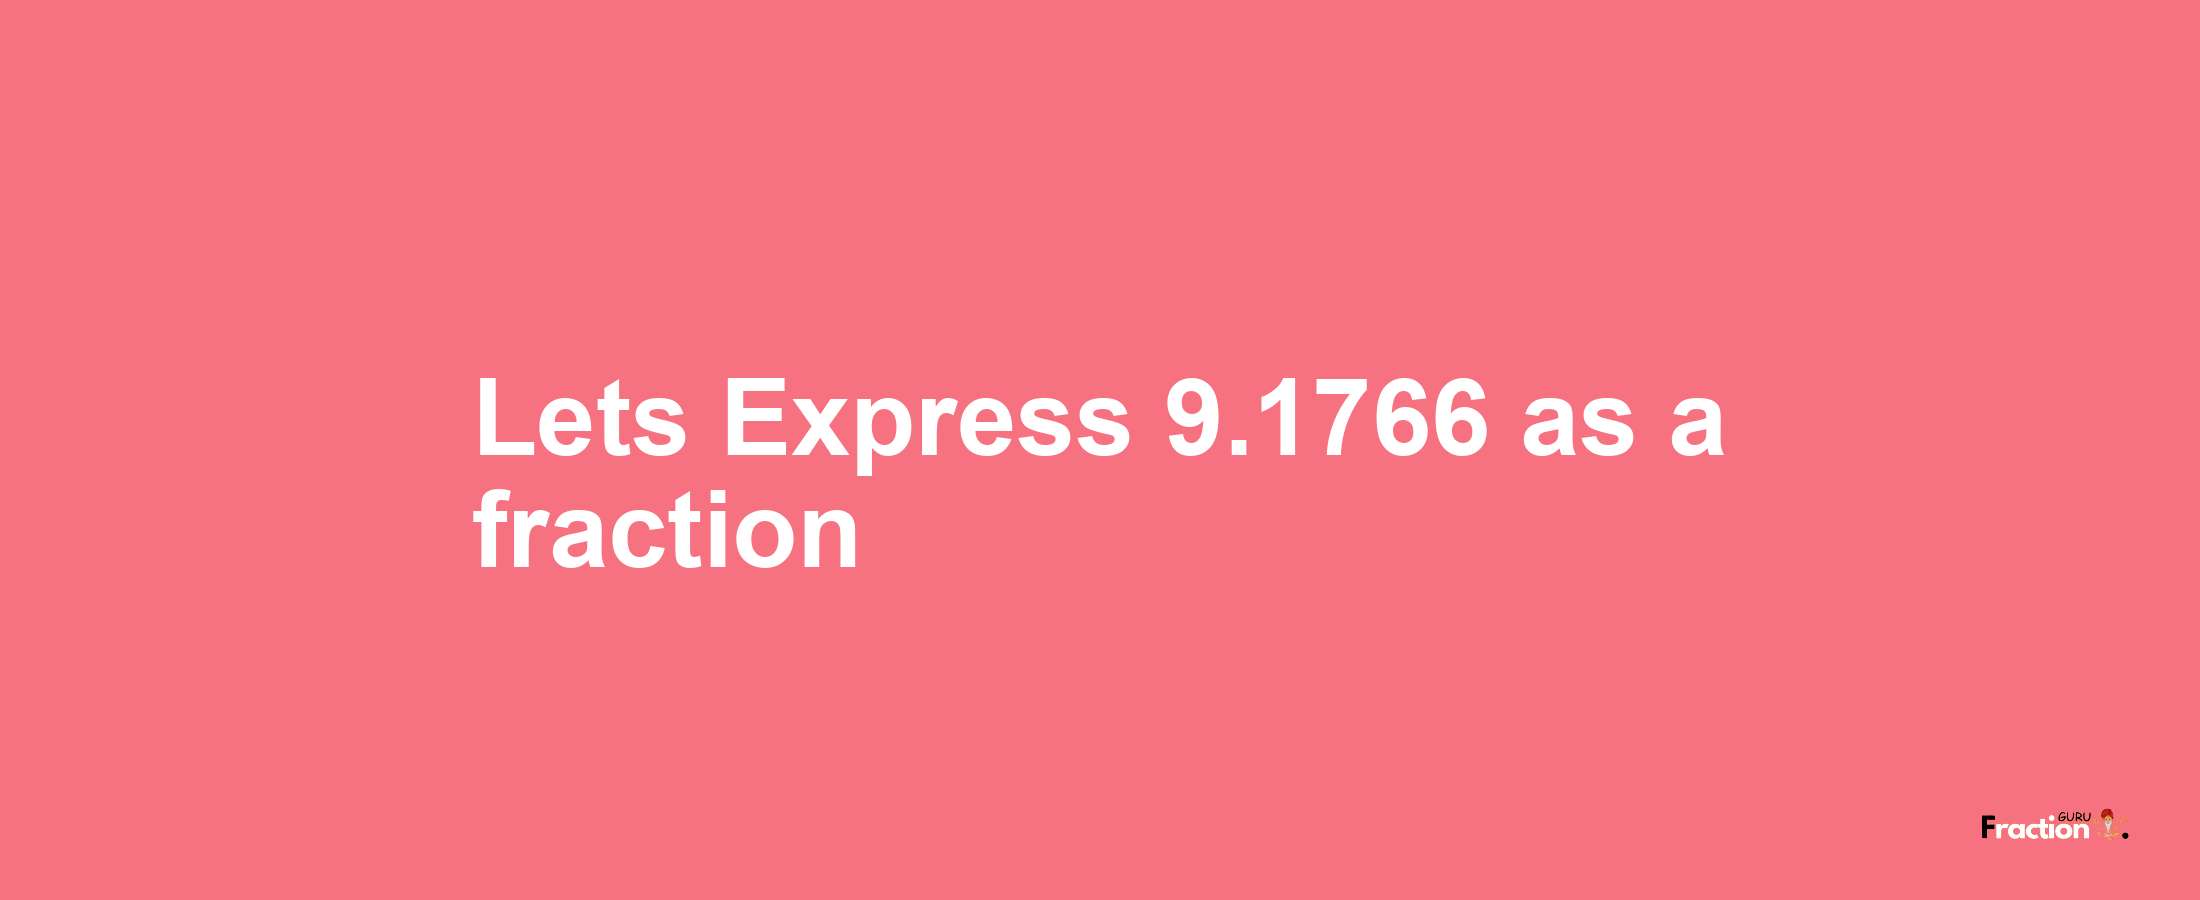 Lets Express 9.1766 as afraction